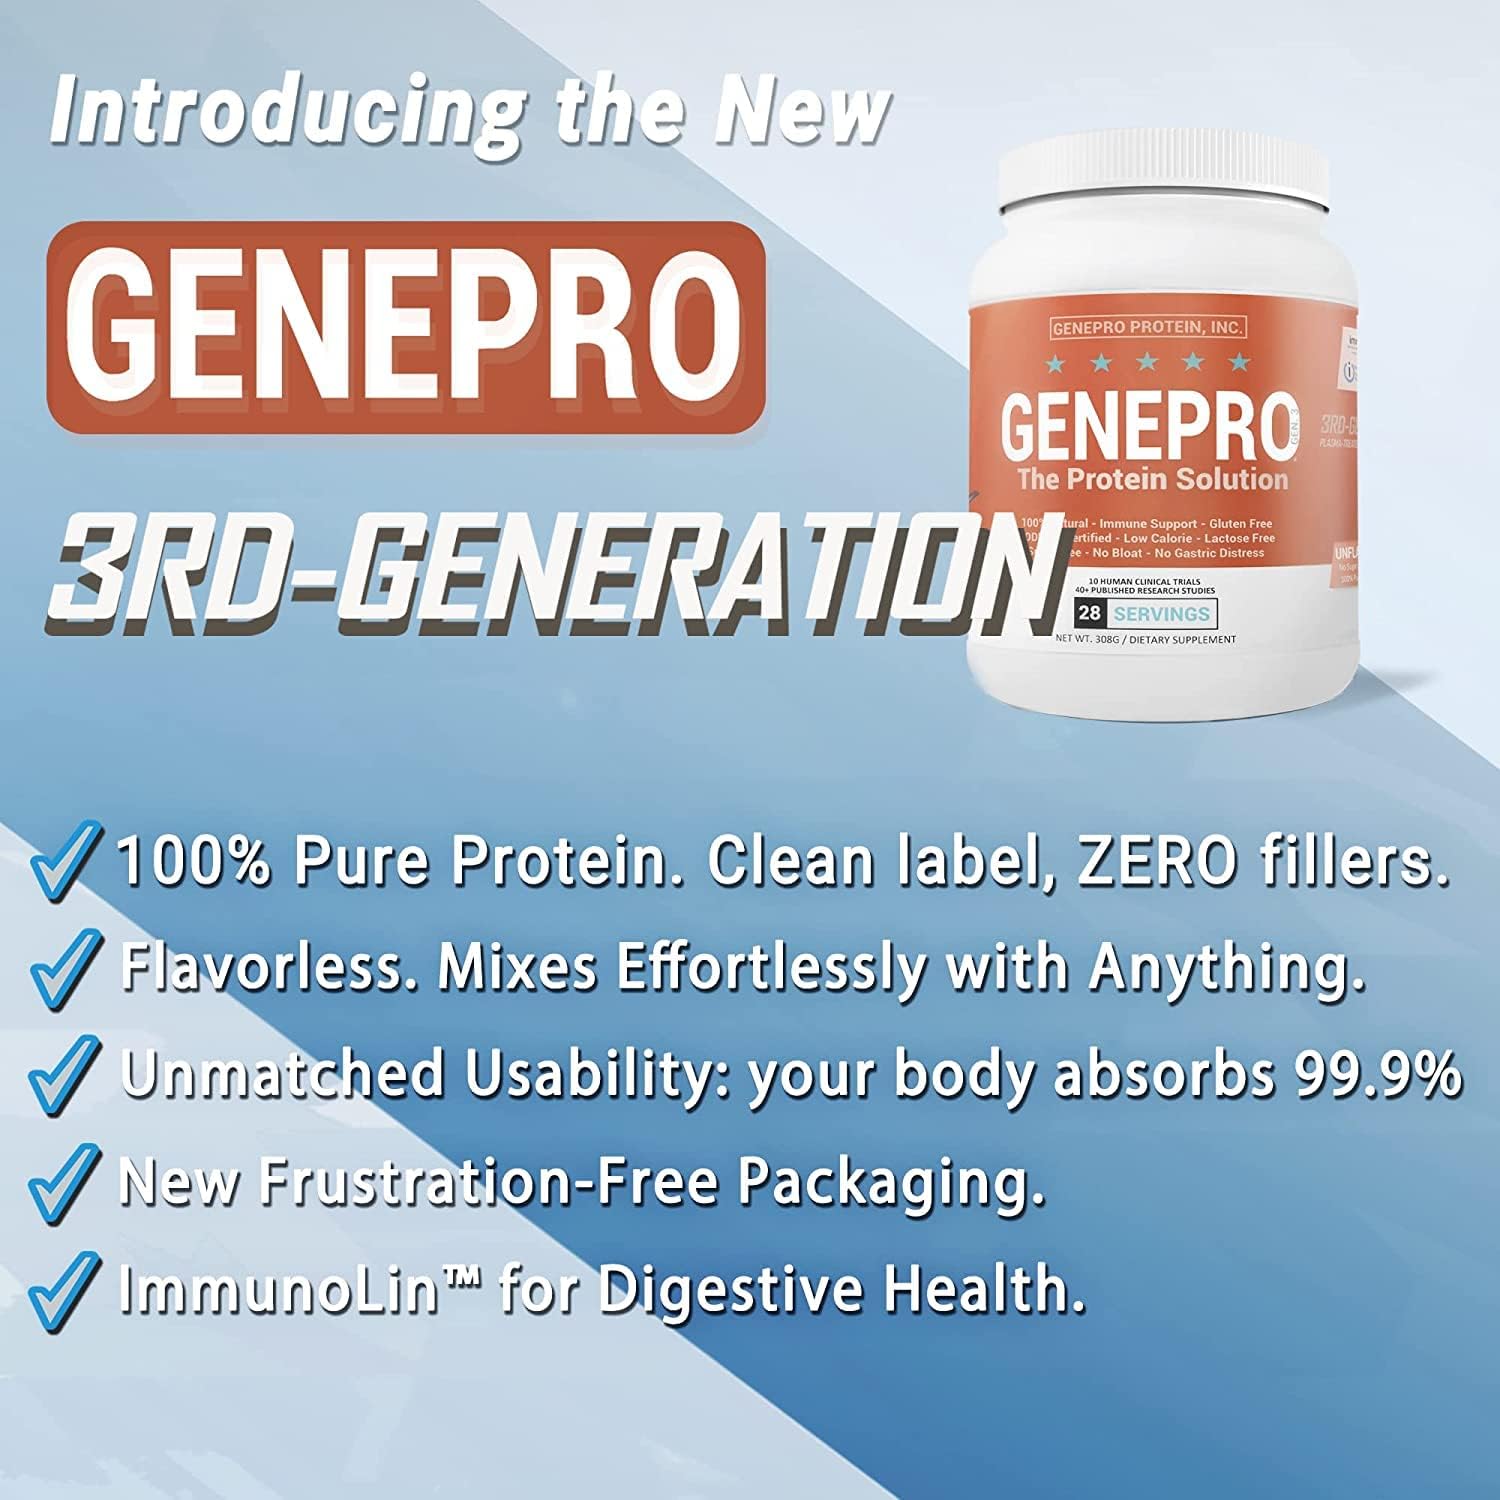 GENEPRO Protein: 45 Servings, Premium Protein for Absorption, Muscle Growth and Mix-Ability. : Health & Household